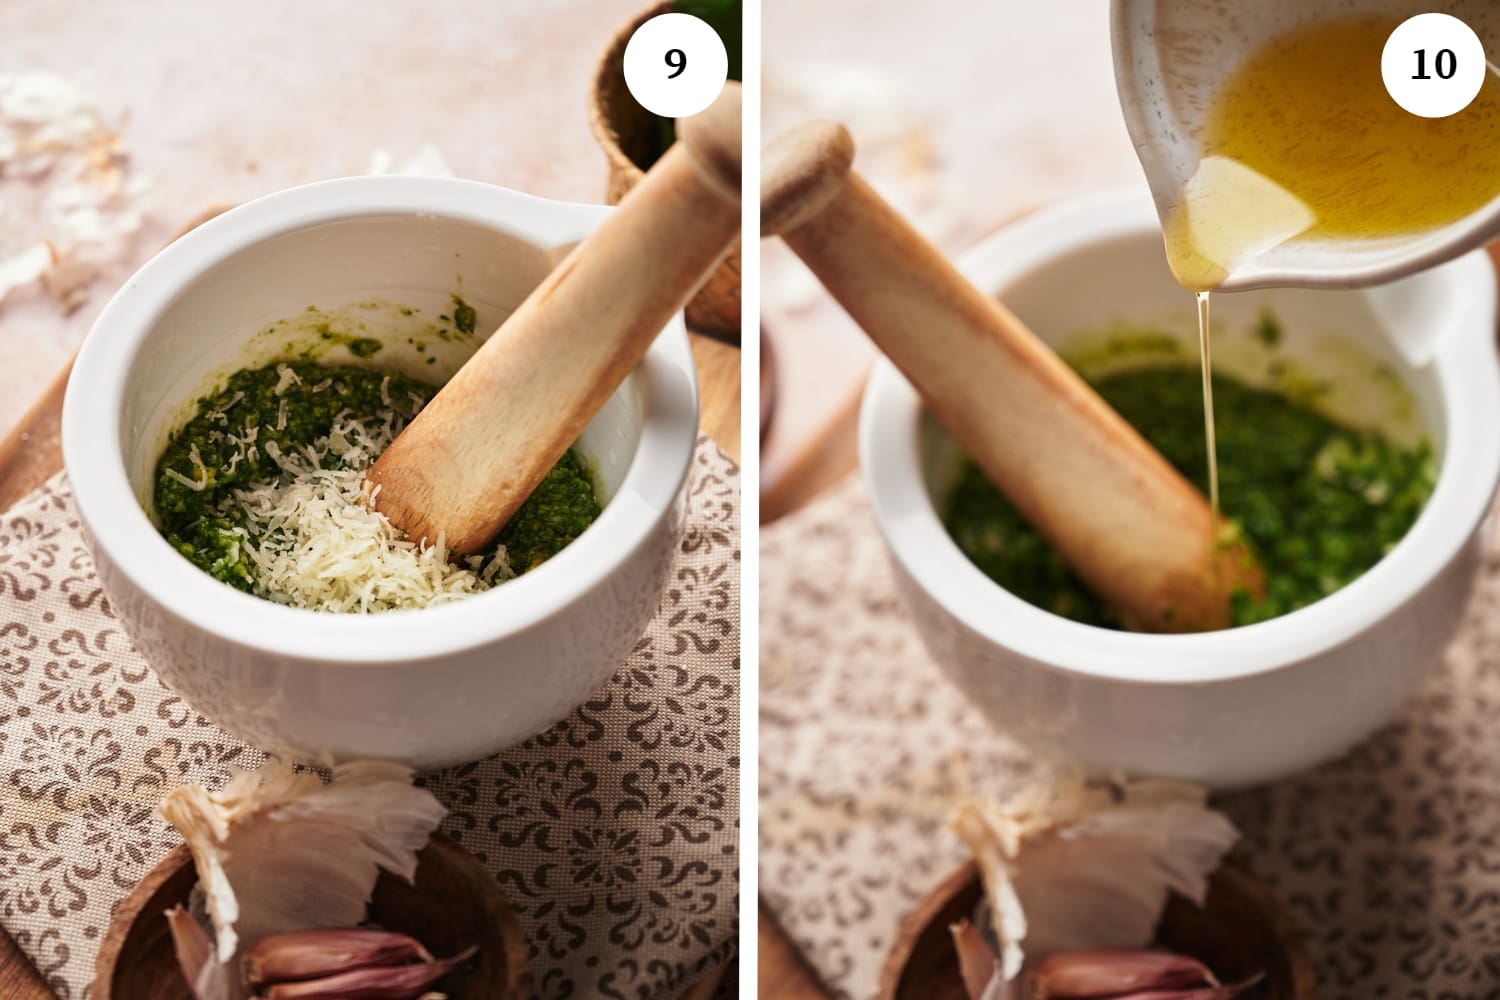 mortar and pestle with pesto mixture inside and cheese on top. next photo is a pesto mixture in a mortar and pestle with olive oil being added to it.